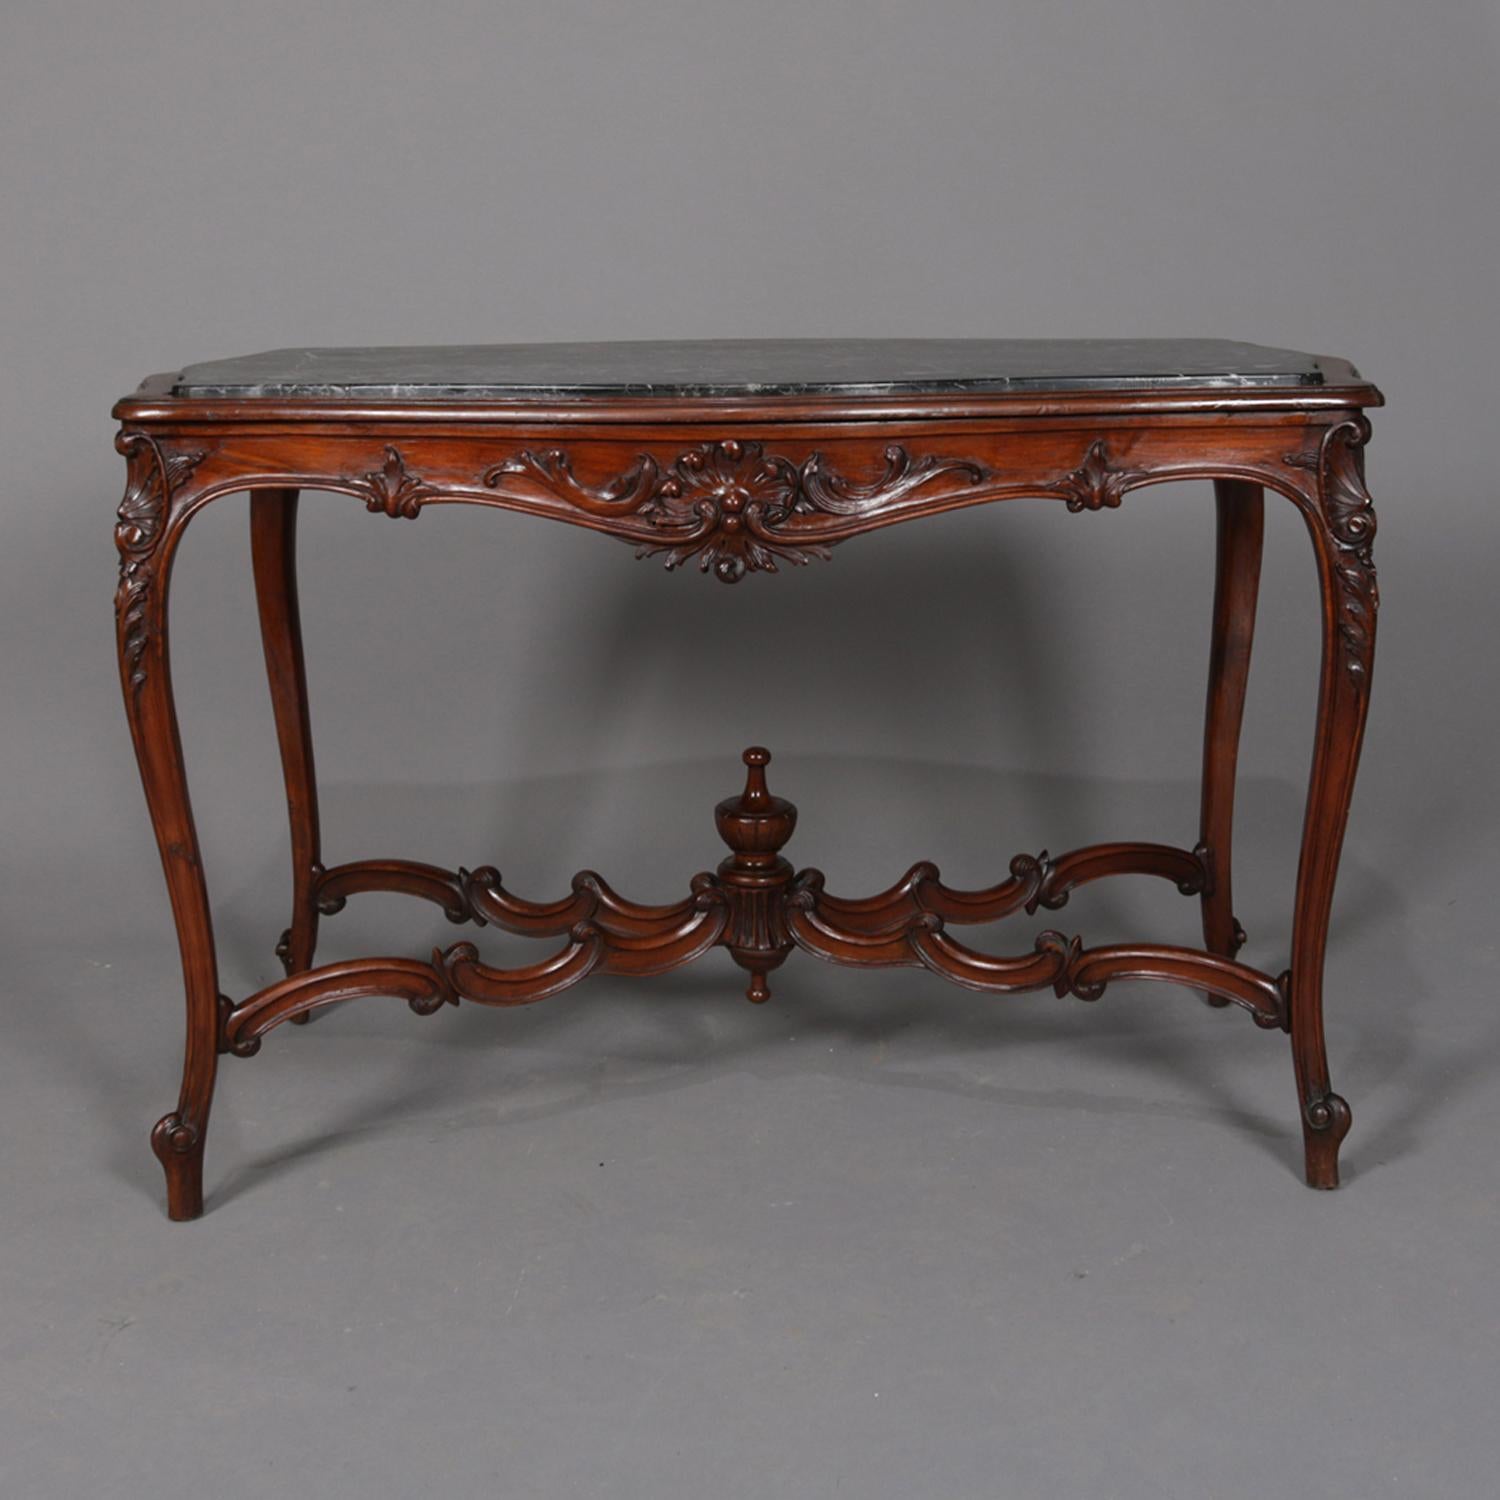 Antique French Louis XV centre table features mahogany base with shaped skirt having shell and foliate design supporting inset marble top and raised on cabriole legs with acanthus knees and c-scroll stretcher with central finial, circa